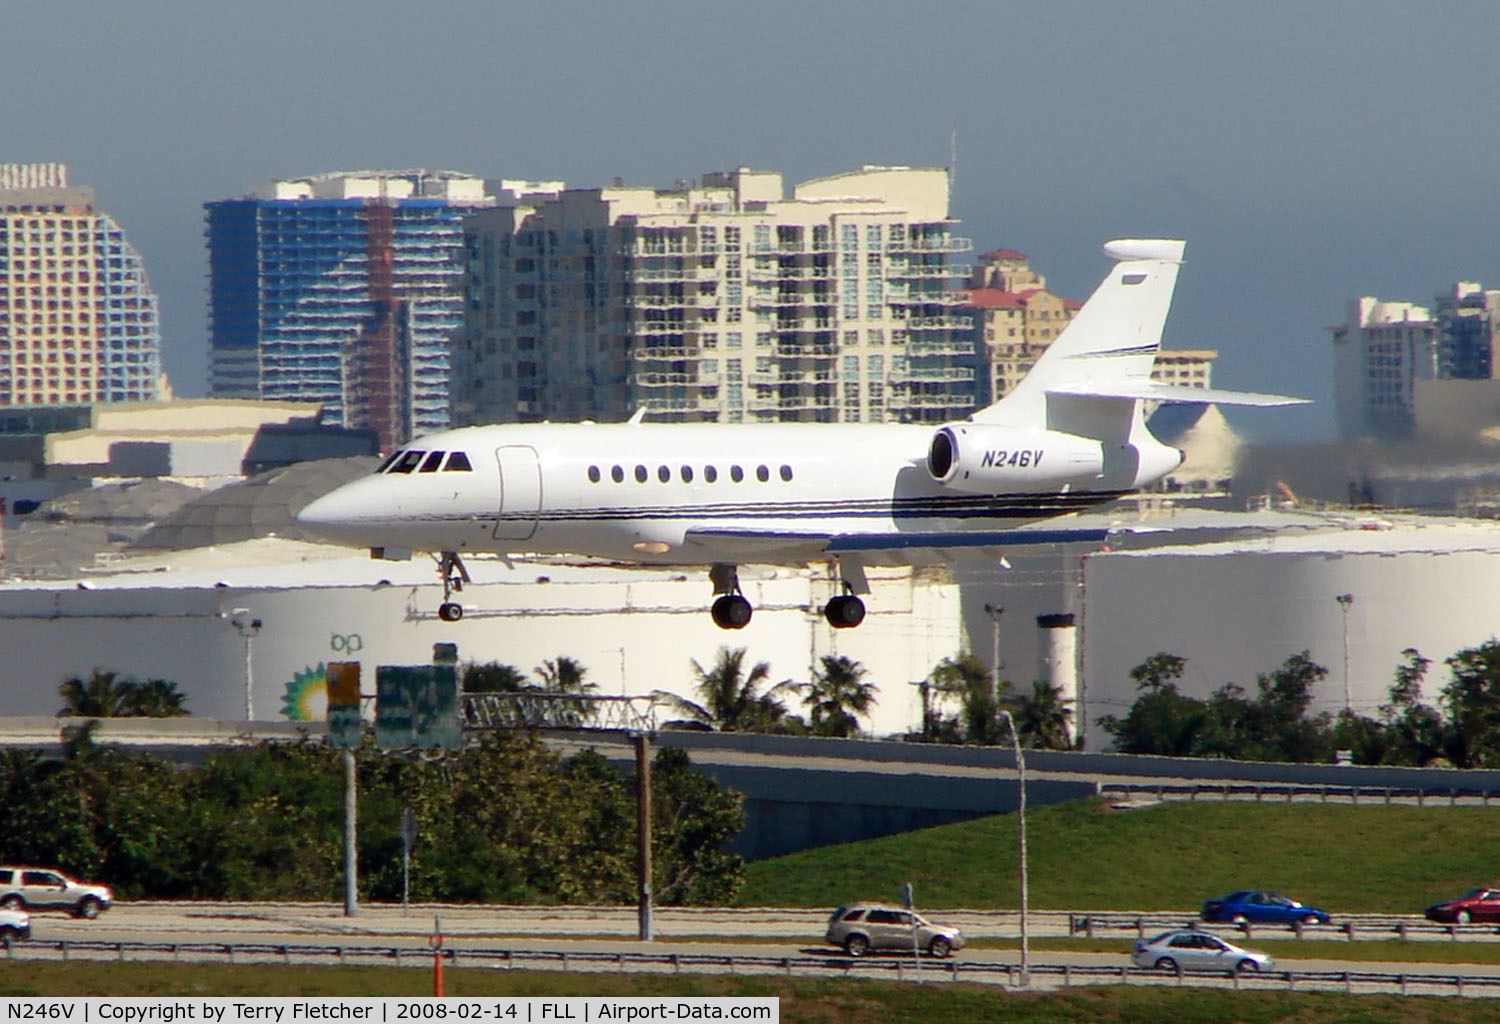 N246V, Gulfstream Aerospace GIV-X (G450) C/N 4149, Falcon 2000 about to land at Ft.Lauderdale Int in Feb 2008